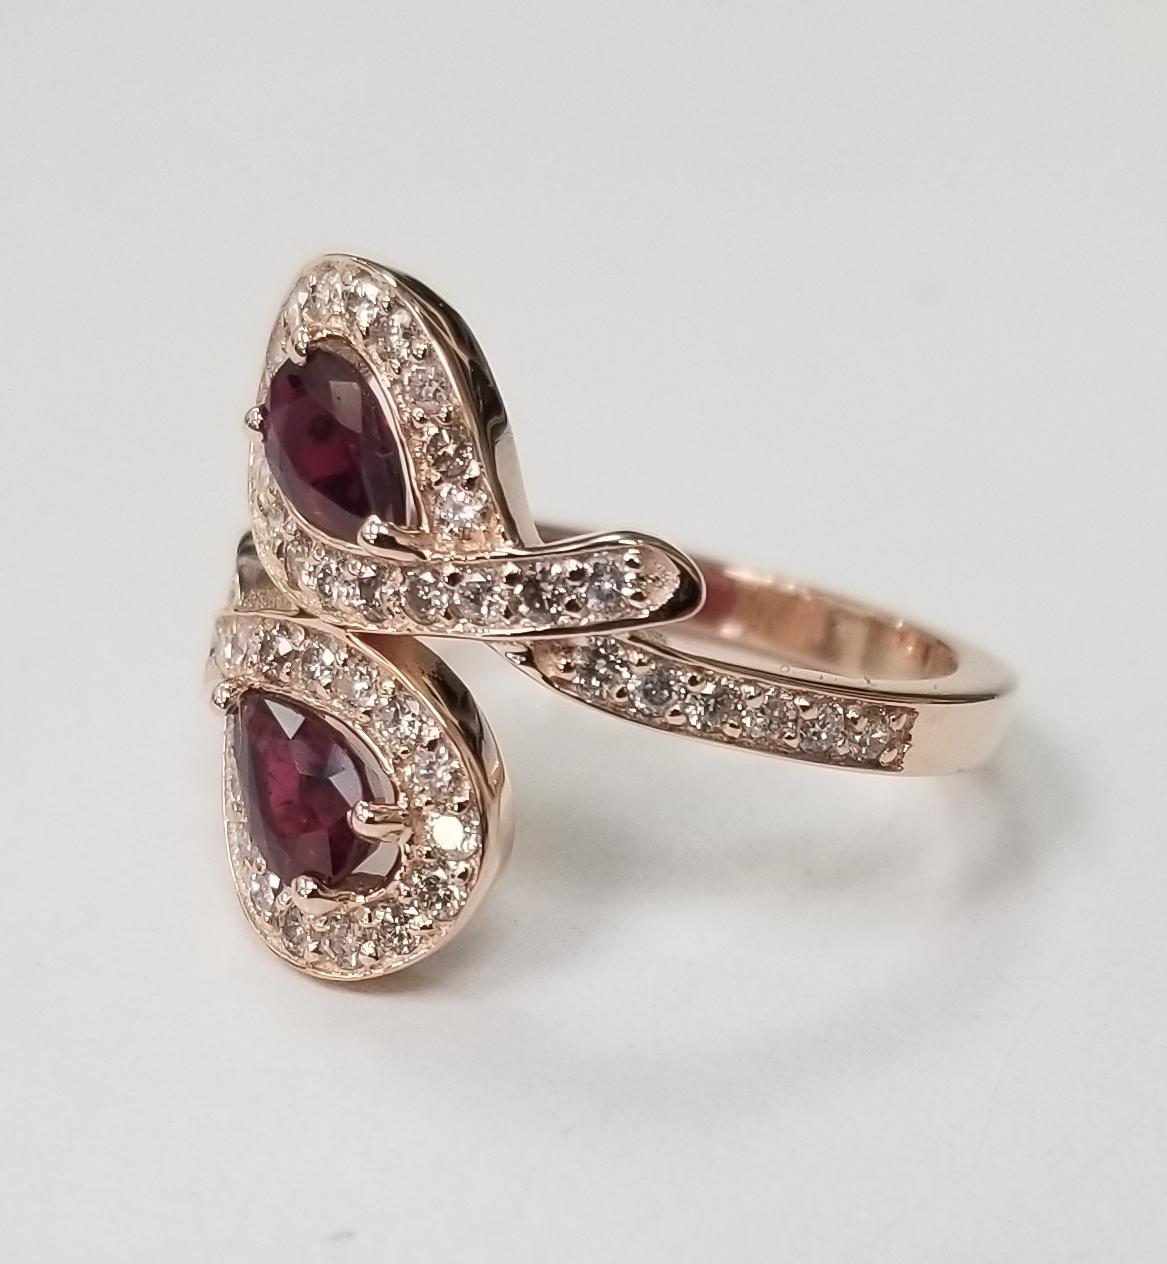 14k rose gold ruby and diamond ring, containing 2 pear shape rubies of gem quality weighing .90pts. and 48 round full cut diamonds of very good quality weighing .55pts.  This ring is a size 7 but we will size to fit for free.